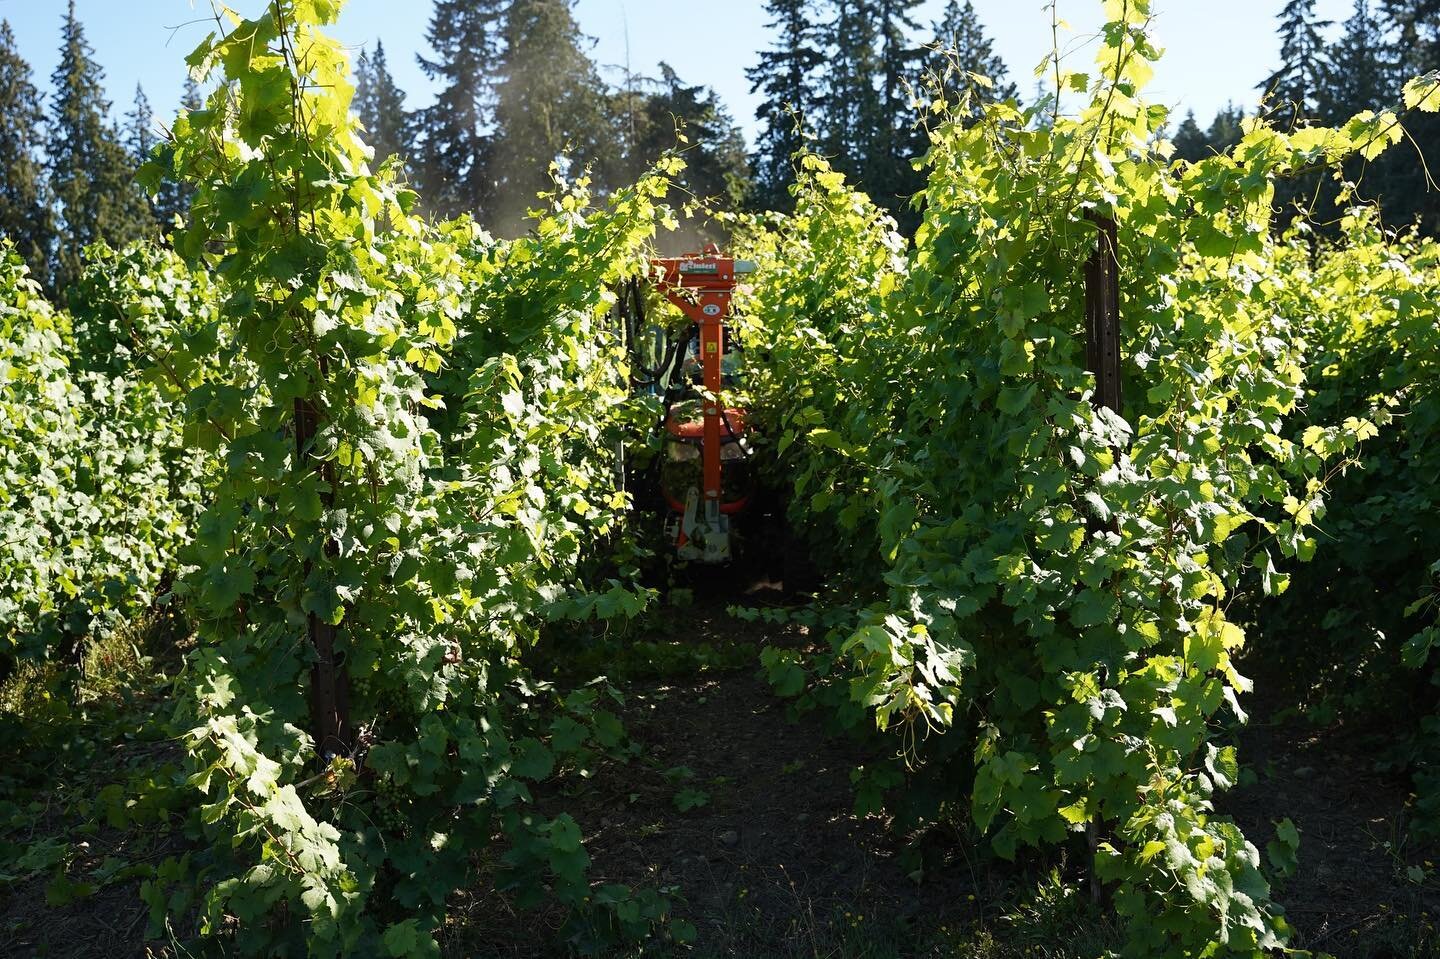 Hedging in the vineyard last week. After over a decade of walking up and down each row and manually trimming the vines with either a Christmas tree knife or gas powered hedger, we upgraded last year to a tractor trimmer. What a time and energy saver!